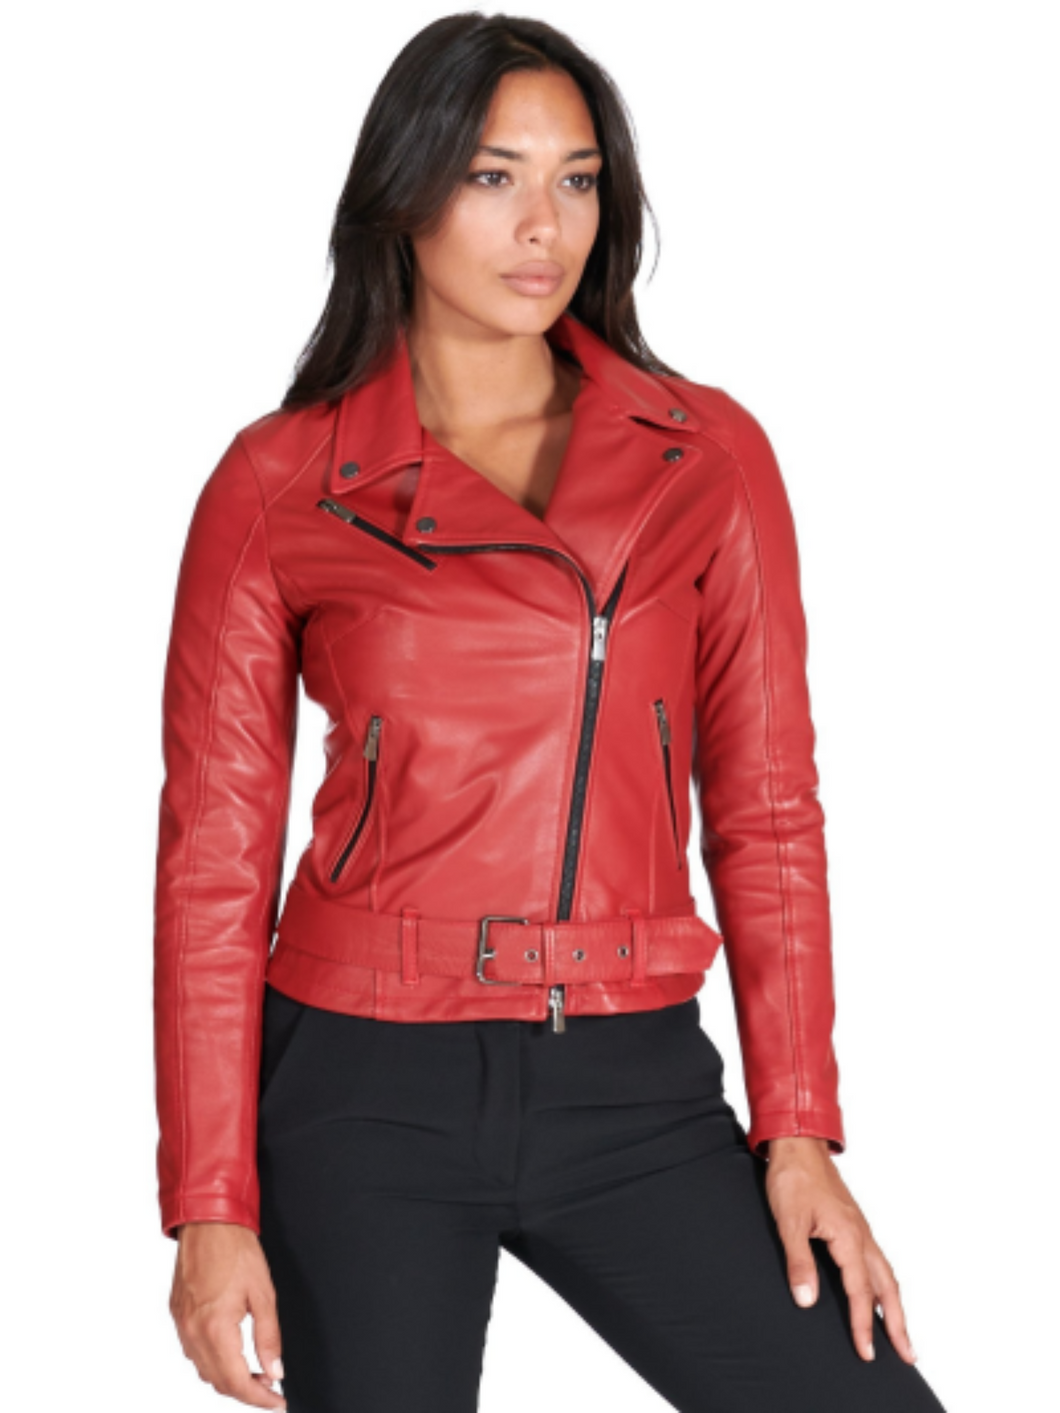 Women’s Red Biker Real Leather Jacket